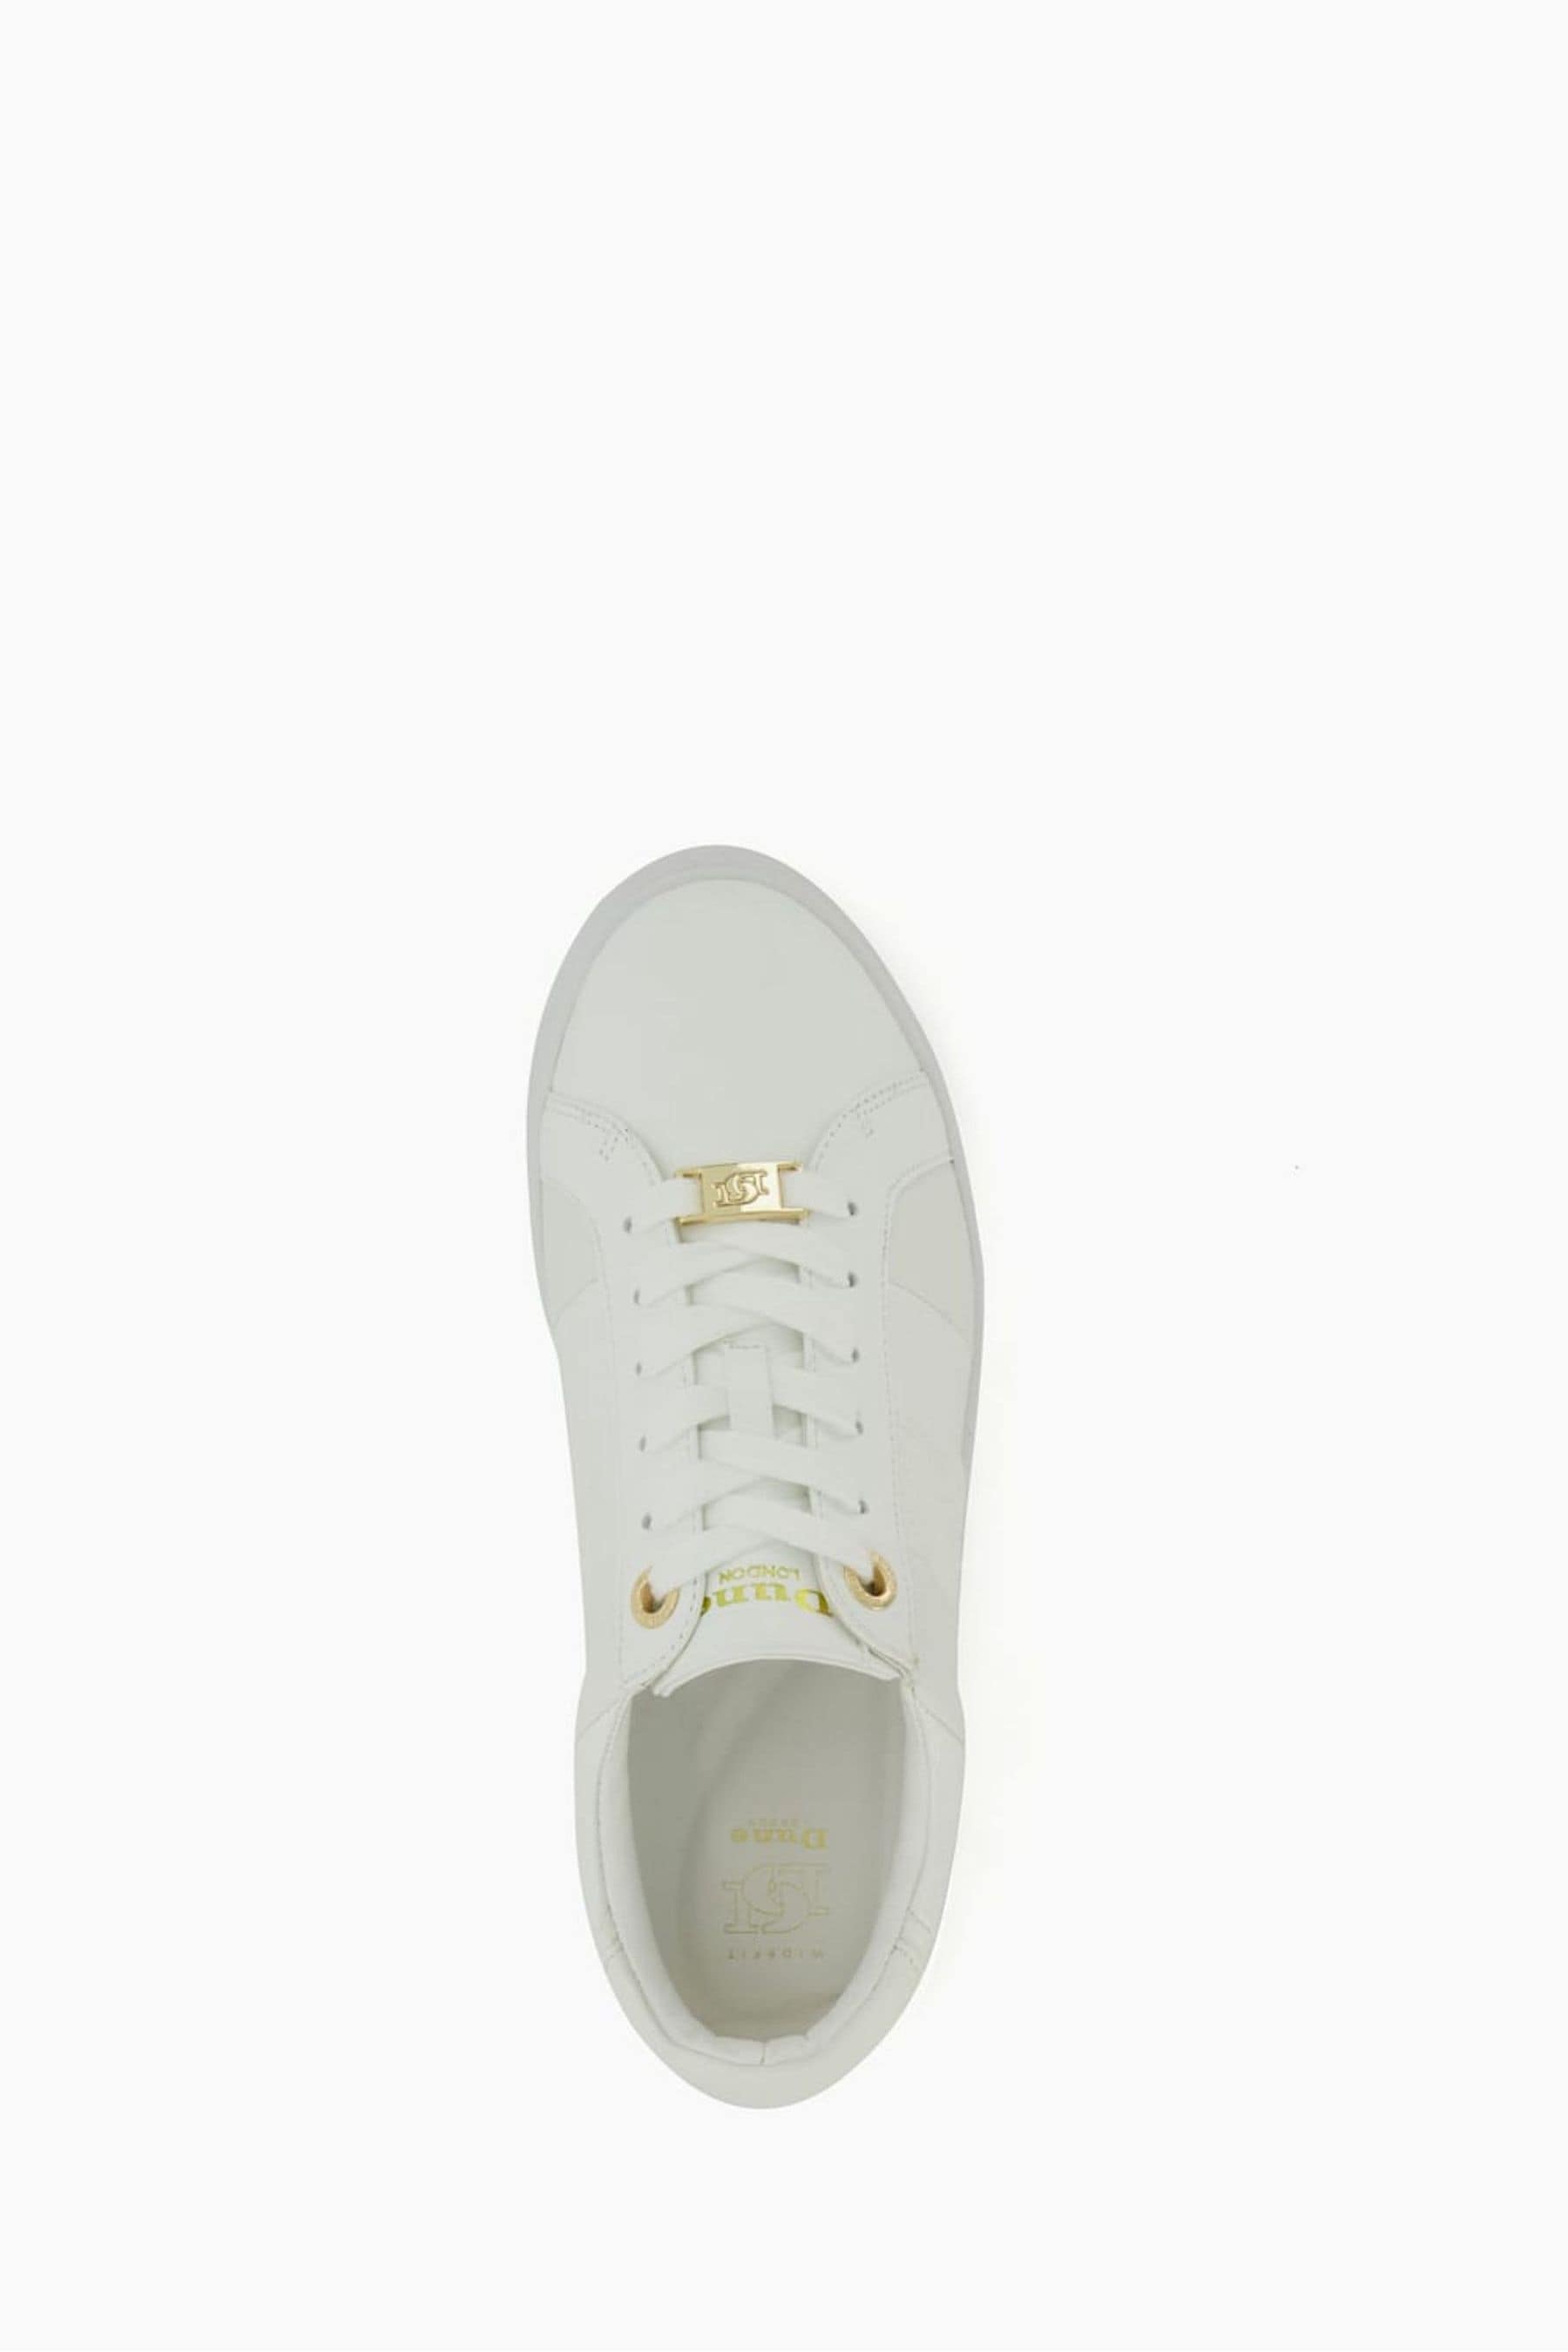 Buy Dune London Wide Fit Everleigh Mix Material Stripe White Trainers ...